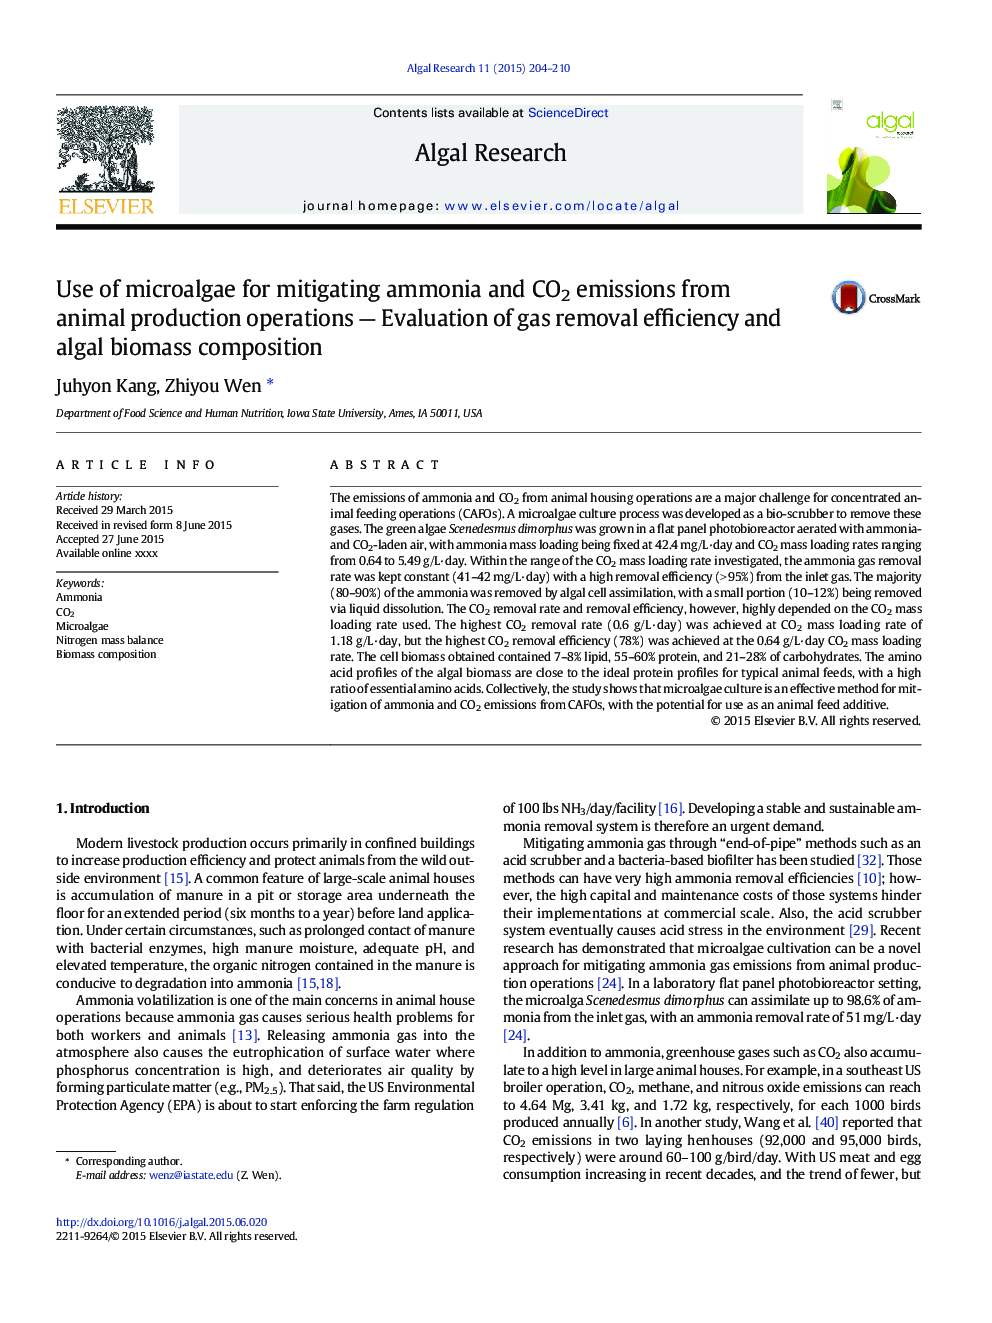 Use of microalgae for mitigating ammonia and CO2 emissions from animal production operations - Evaluation of gas removal efficiency and algal biomass composition